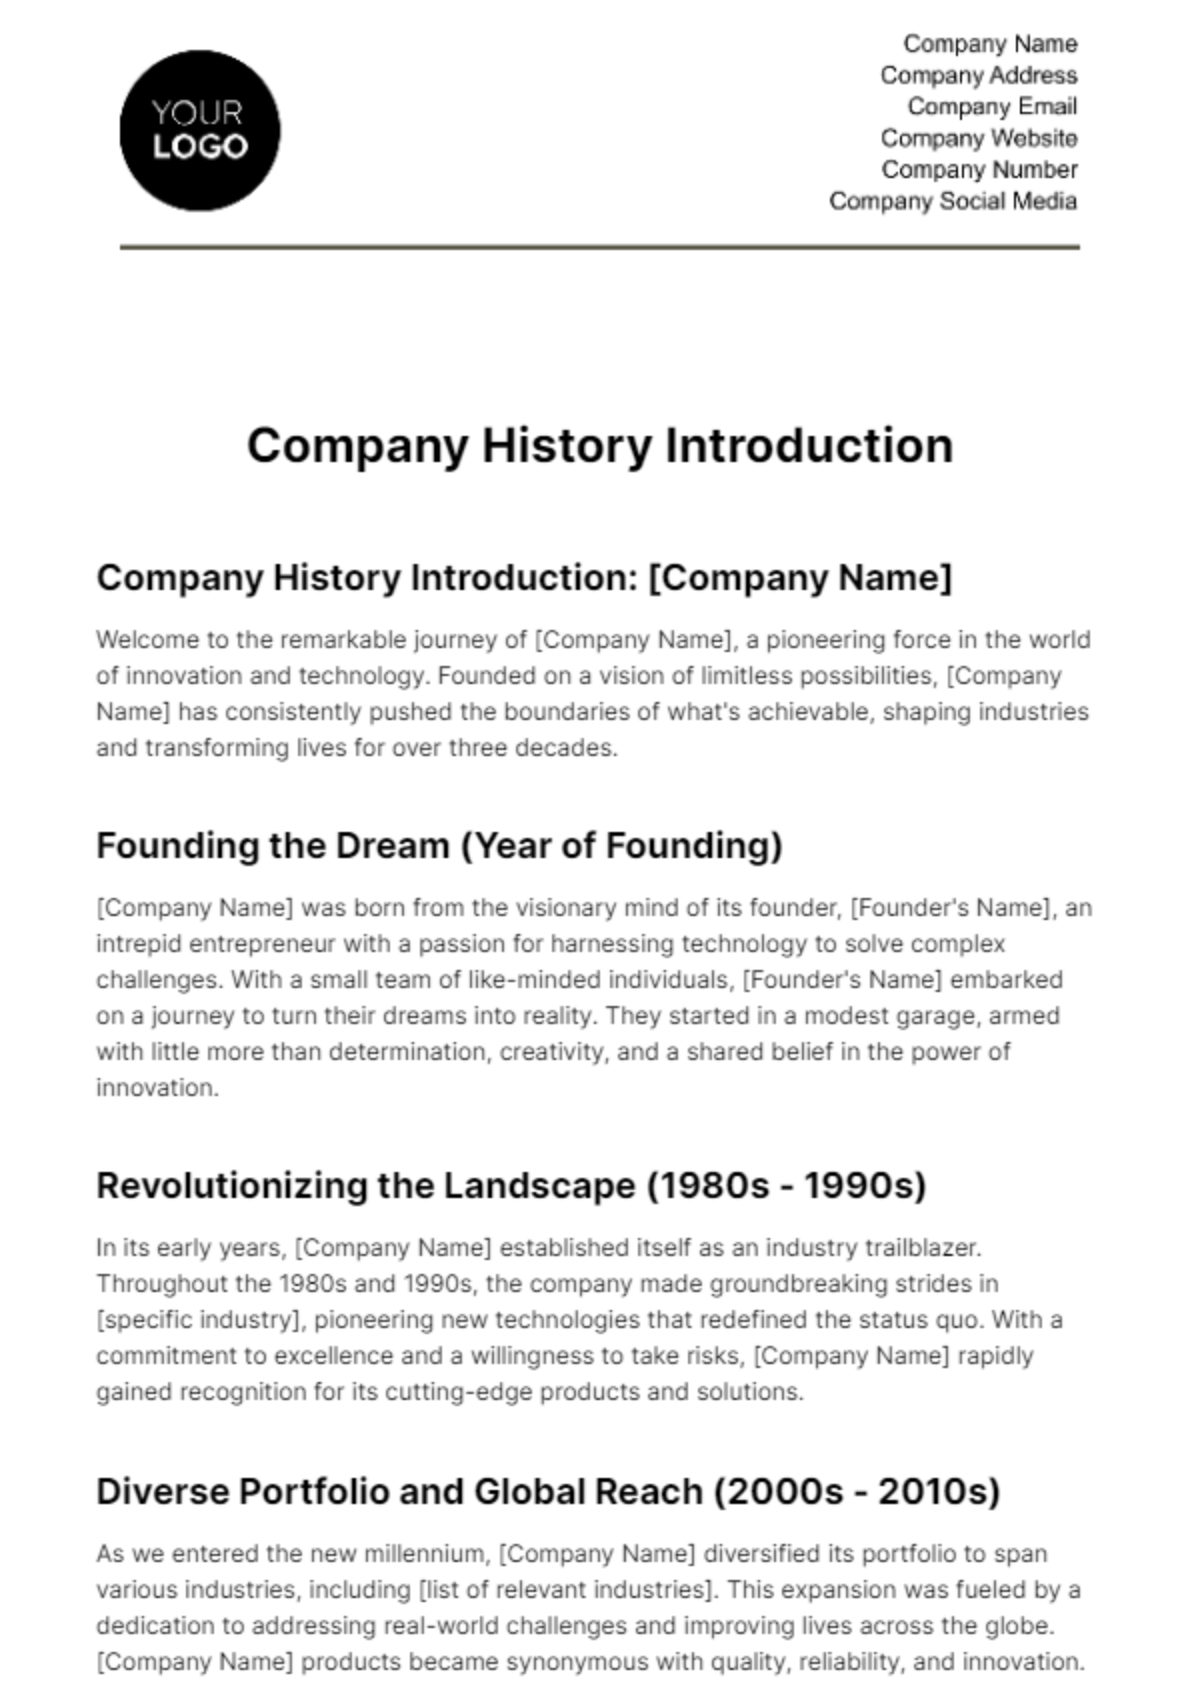 Free Company History Introduction HR Template